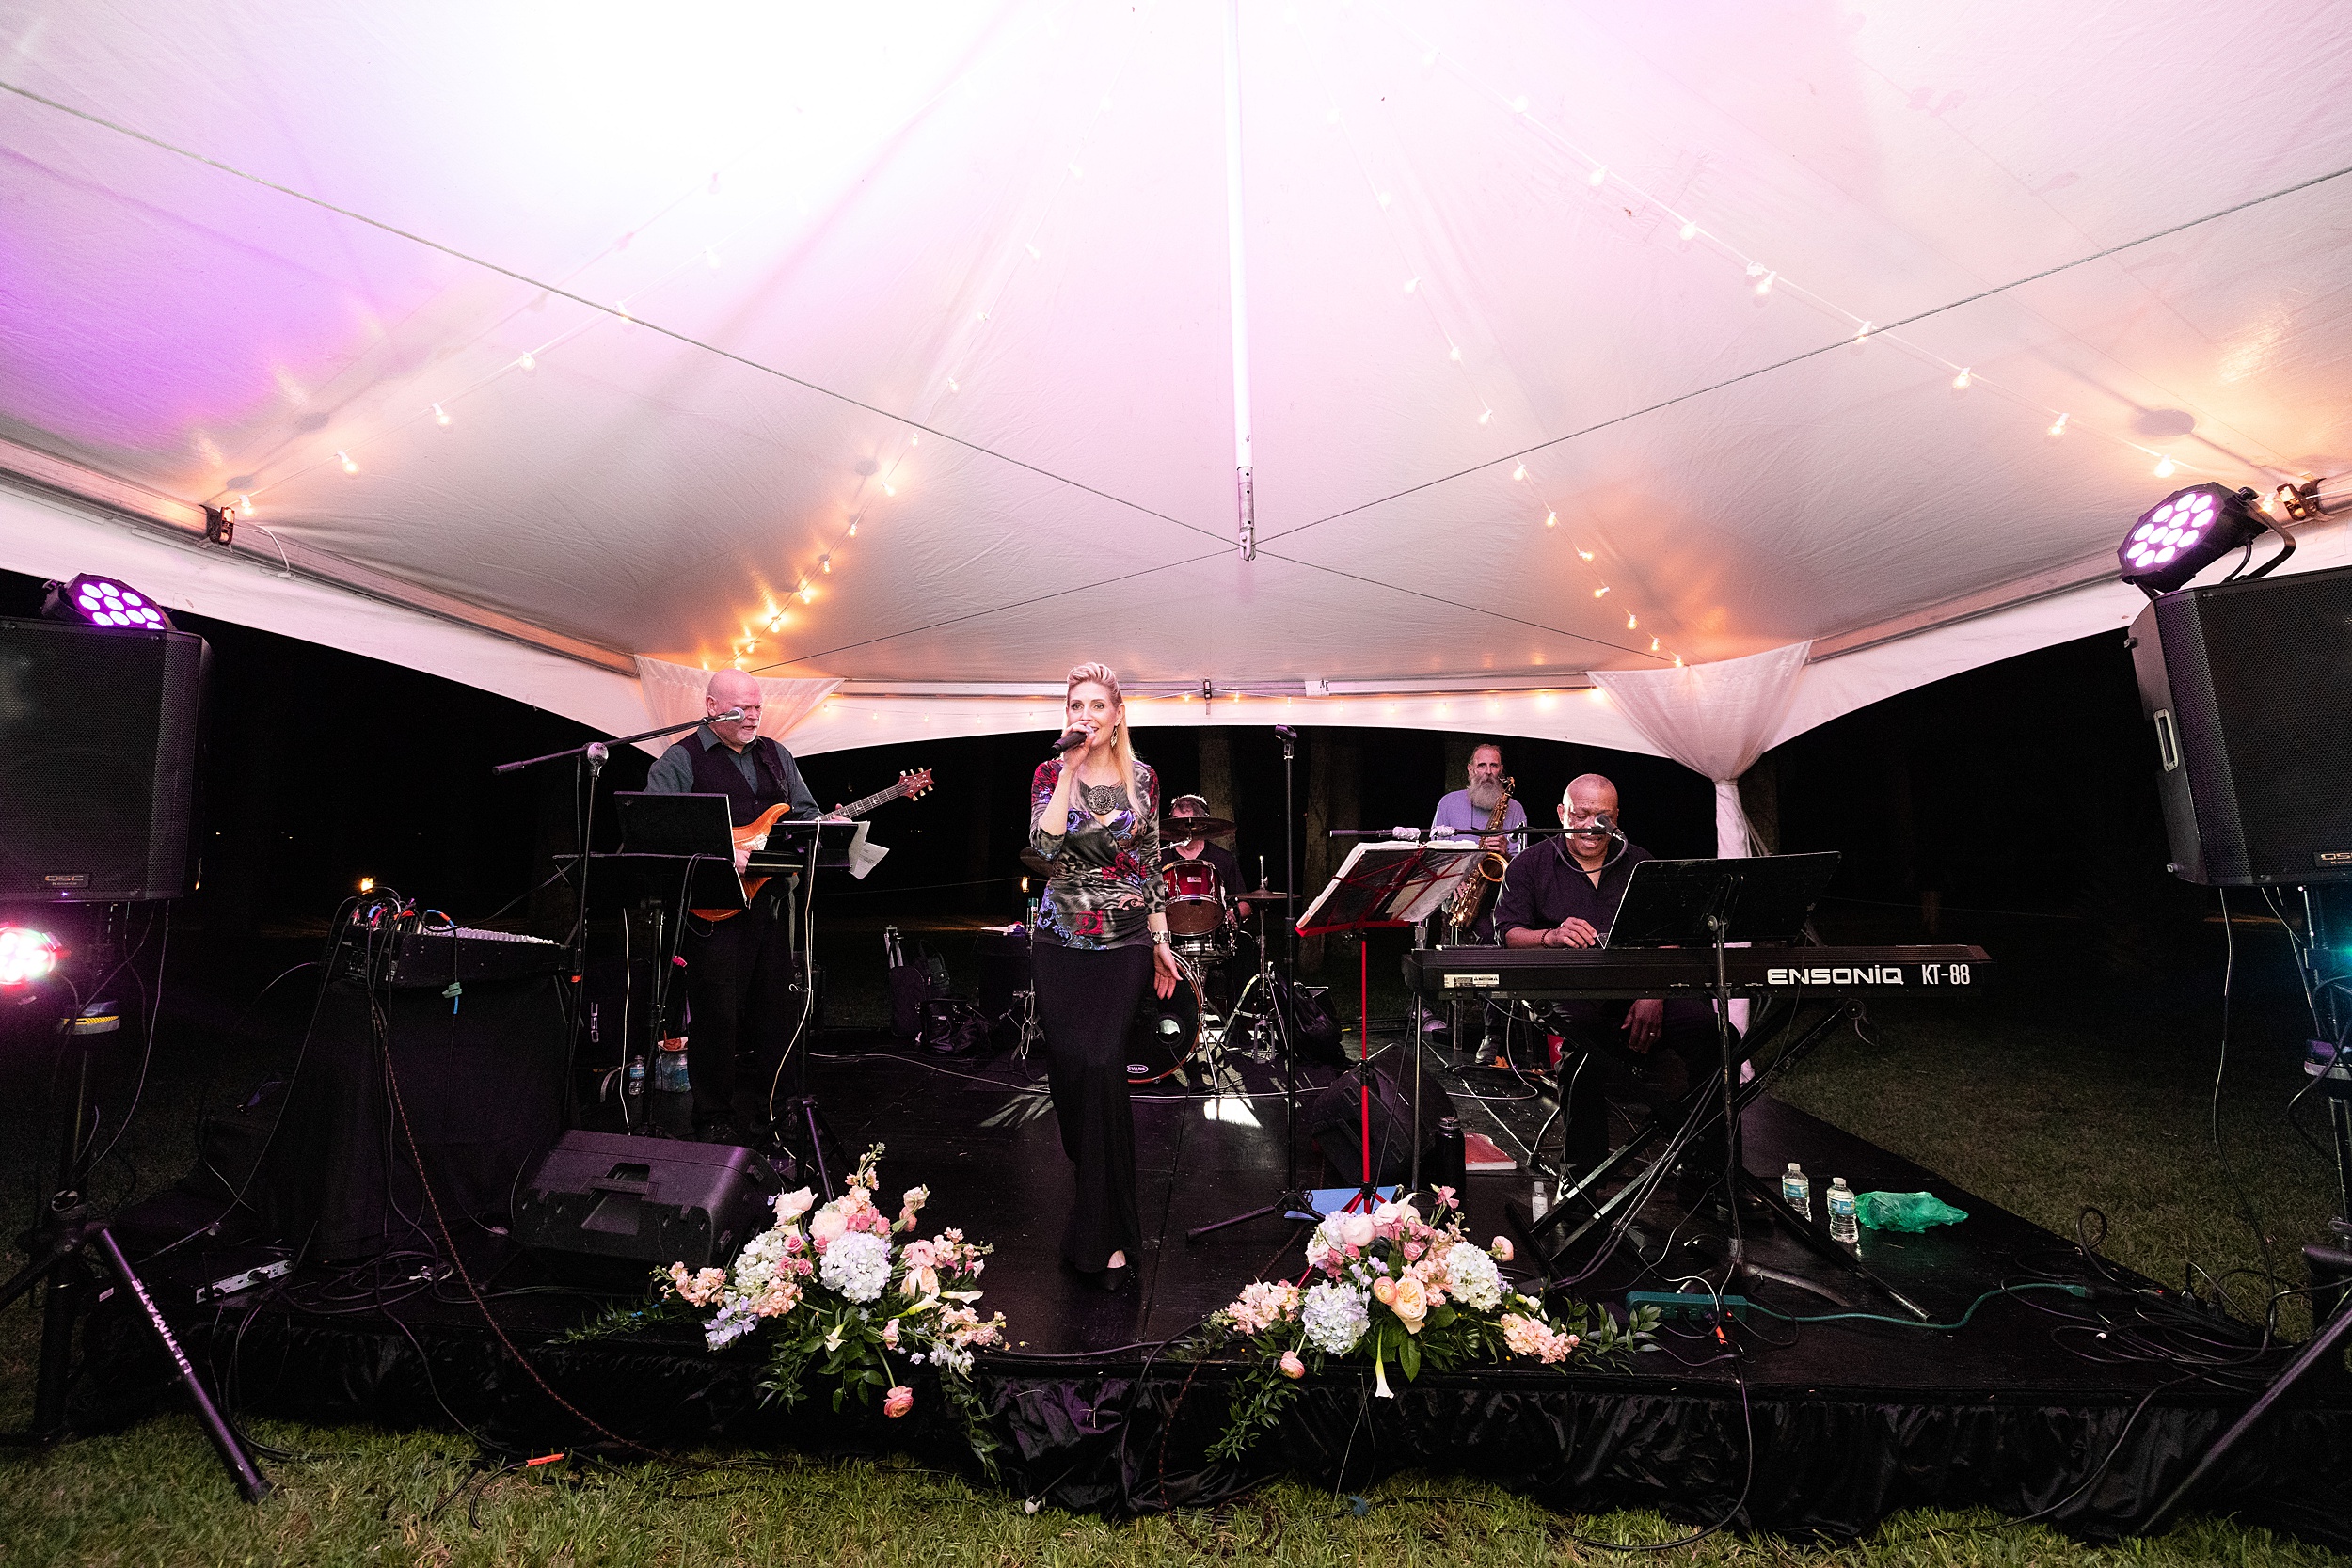 A band plays under a white tent on a stage